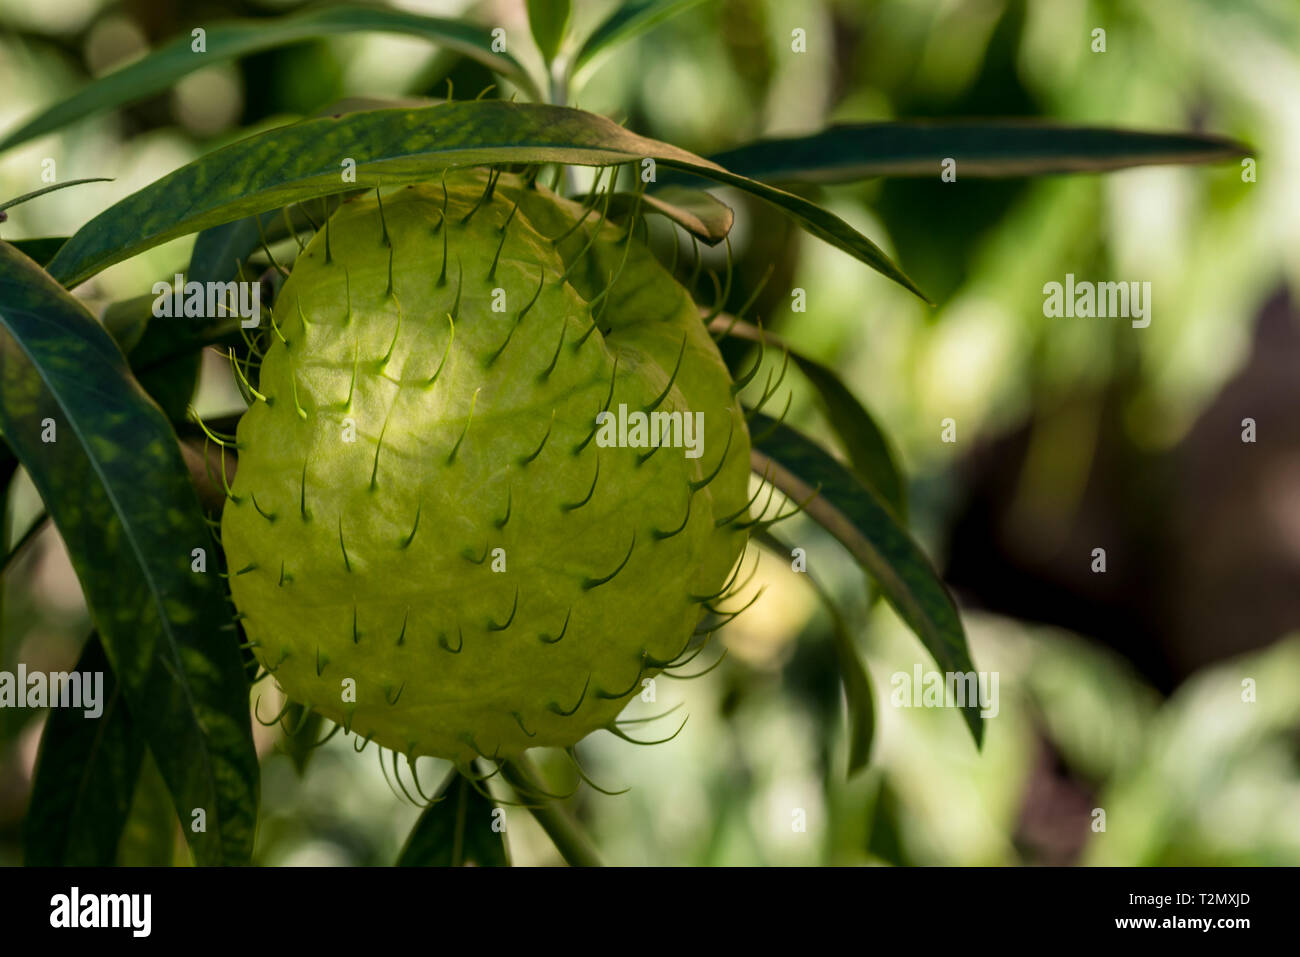 rare plant green fruit with spiny skin Stock Photo